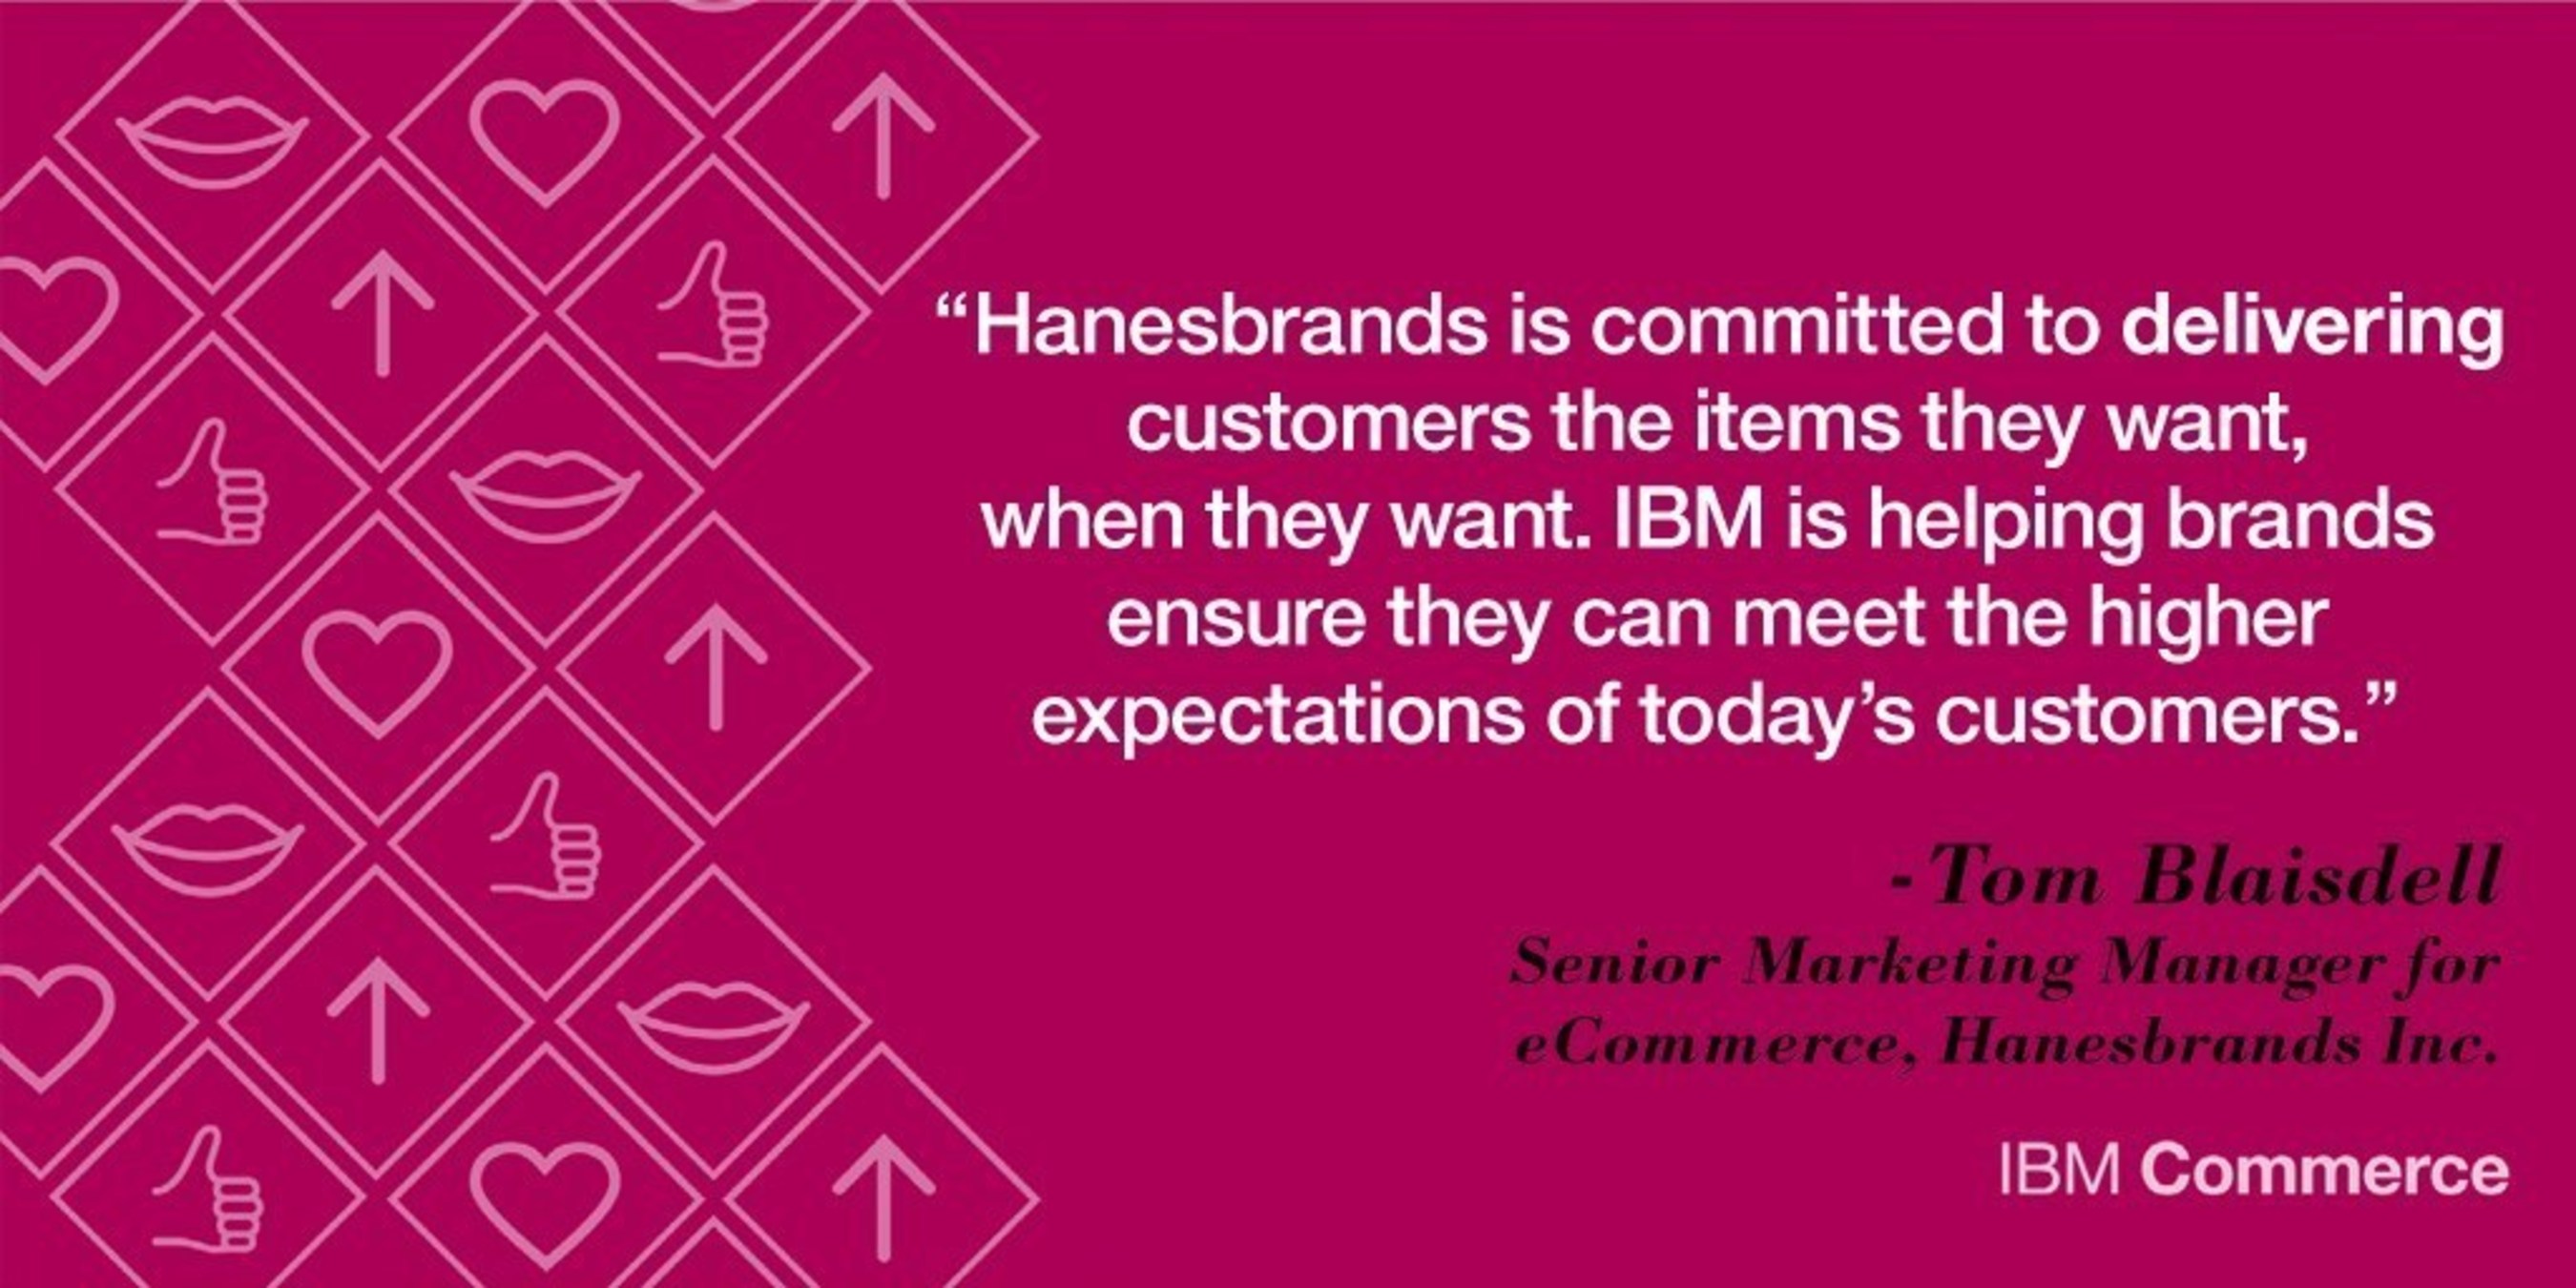 Hanesbrands and IBM Commerce engage customers to drive brand loyalty